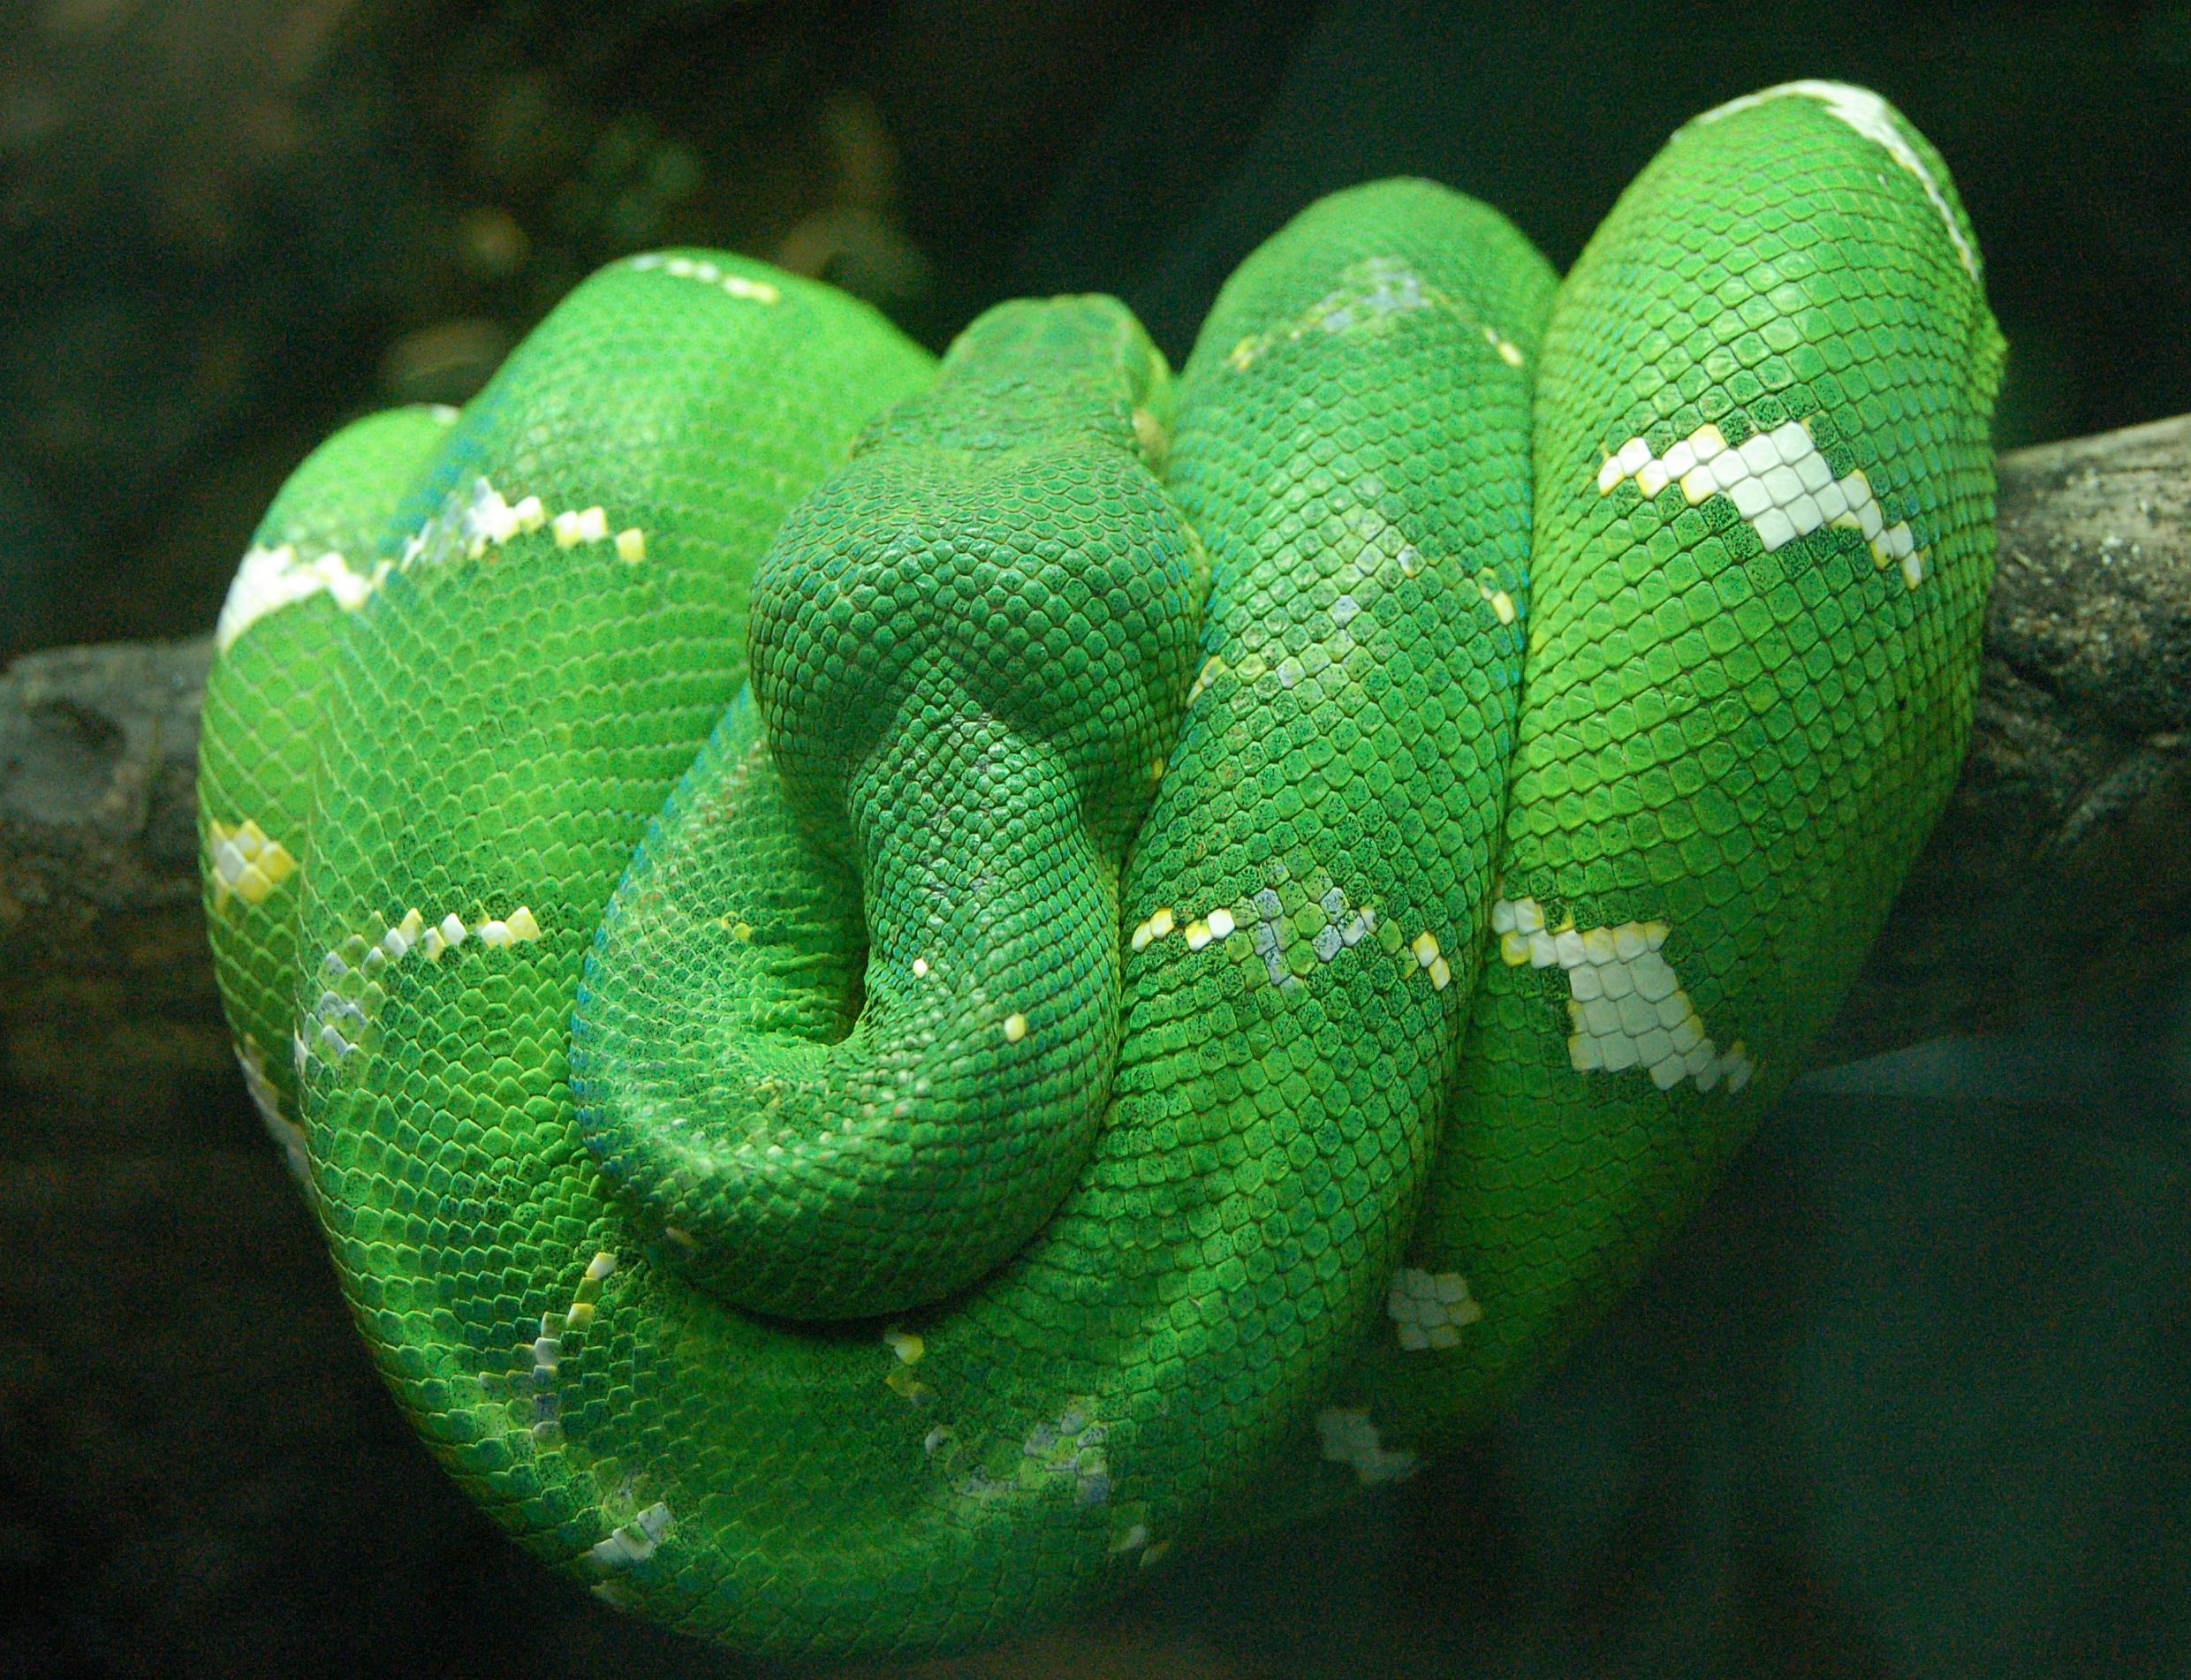 Top 10 Most Beautiful Snakes on Earth